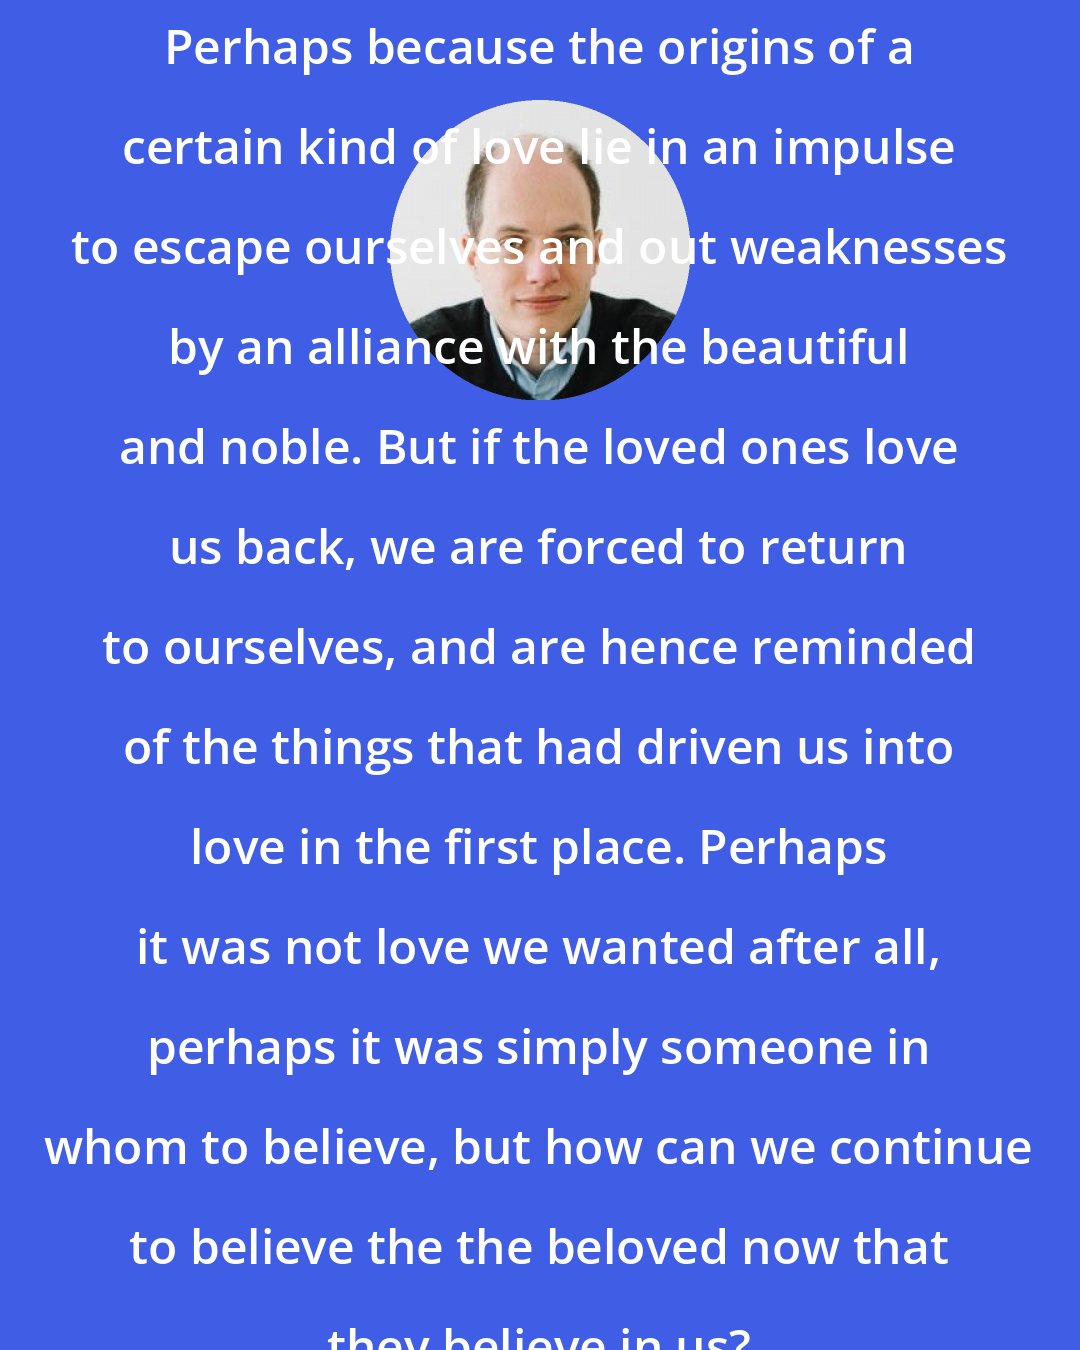 Alain de Botton: Perhaps because the origins of a certain kind of love lie in an impulse to escape ourselves and out weaknesses by an alliance with the beautiful and noble. But if the loved ones love us back, we are forced to return to ourselves, and are hence reminded of the things that had driven us into love in the first place. Perhaps it was not love we wanted after all, perhaps it was simply someone in whom to believe, but how can we continue to believe the the beloved now that they believe in us?